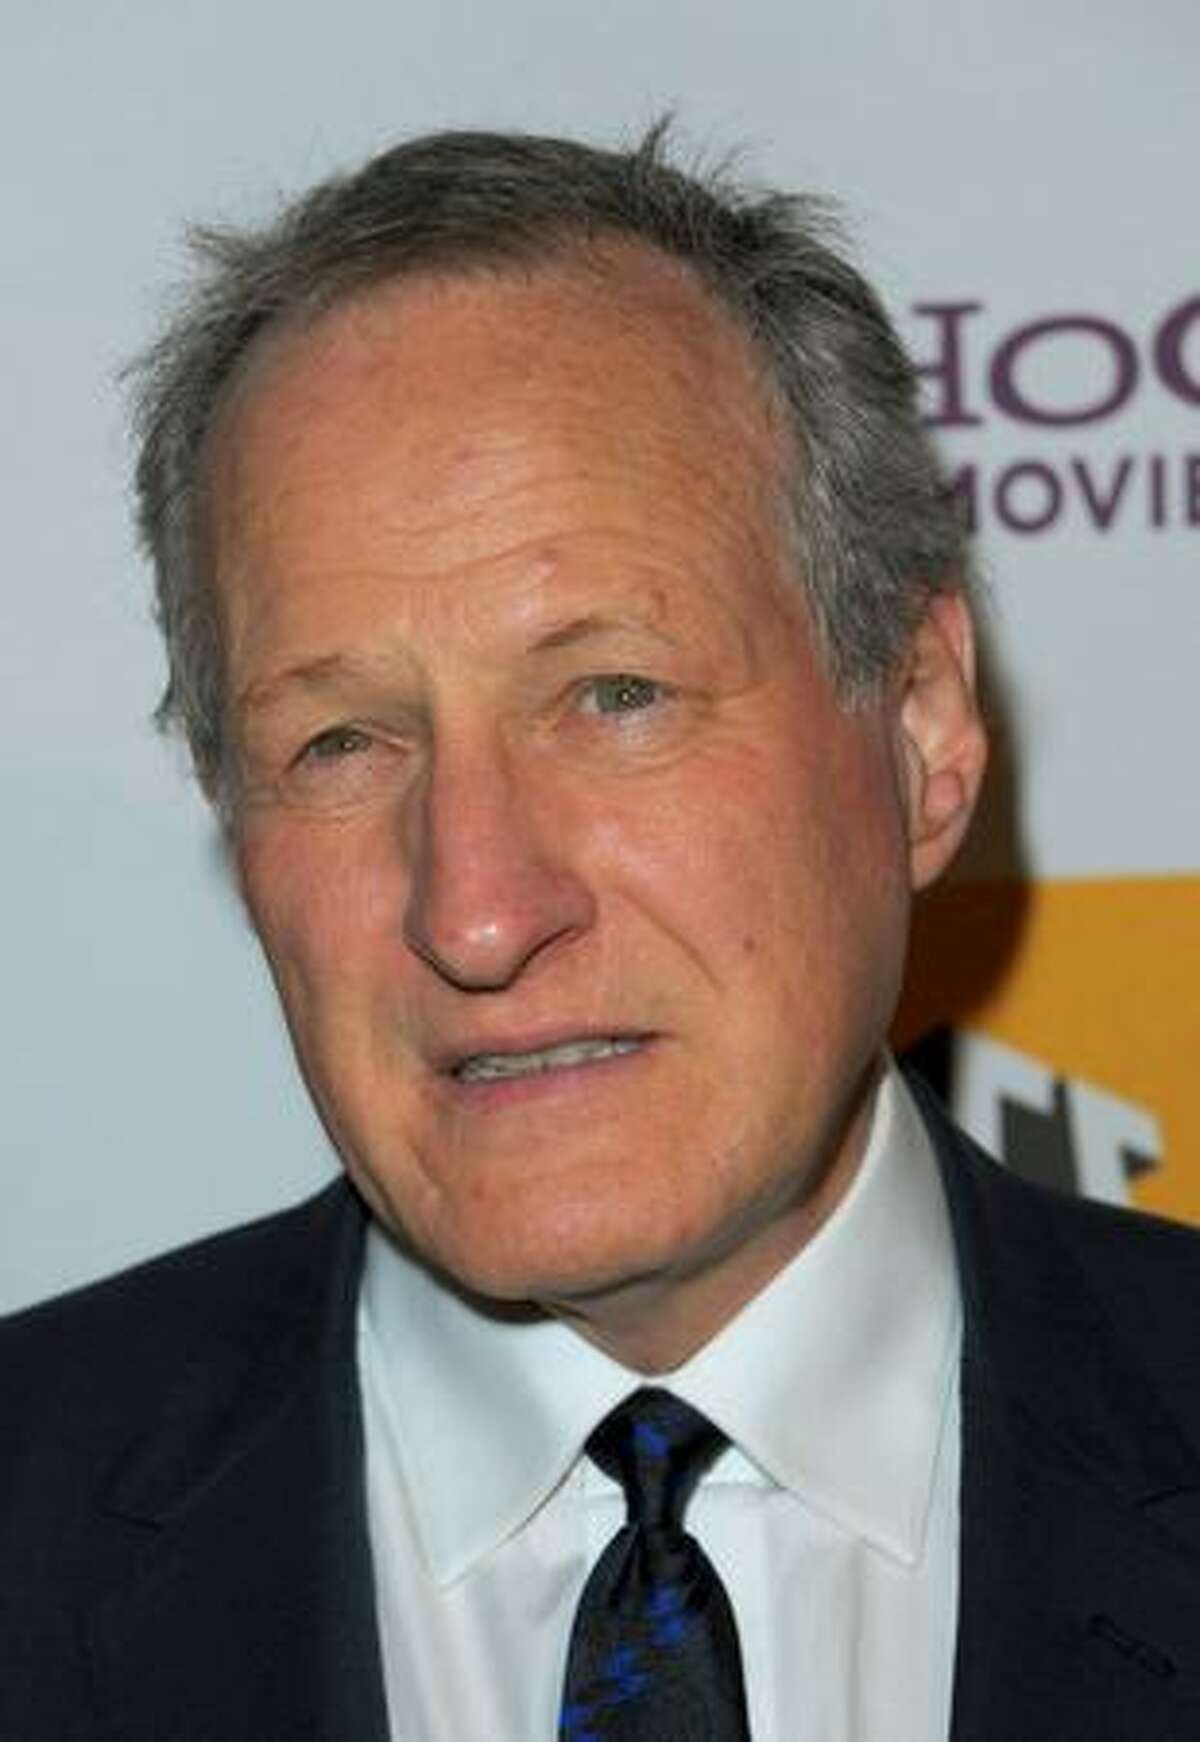 Director Michael Mann arrives at the 13th annual Hollywood Awards Gala Ceremony held at The Beverly Hilton Hotel in Beverly Hills, California.